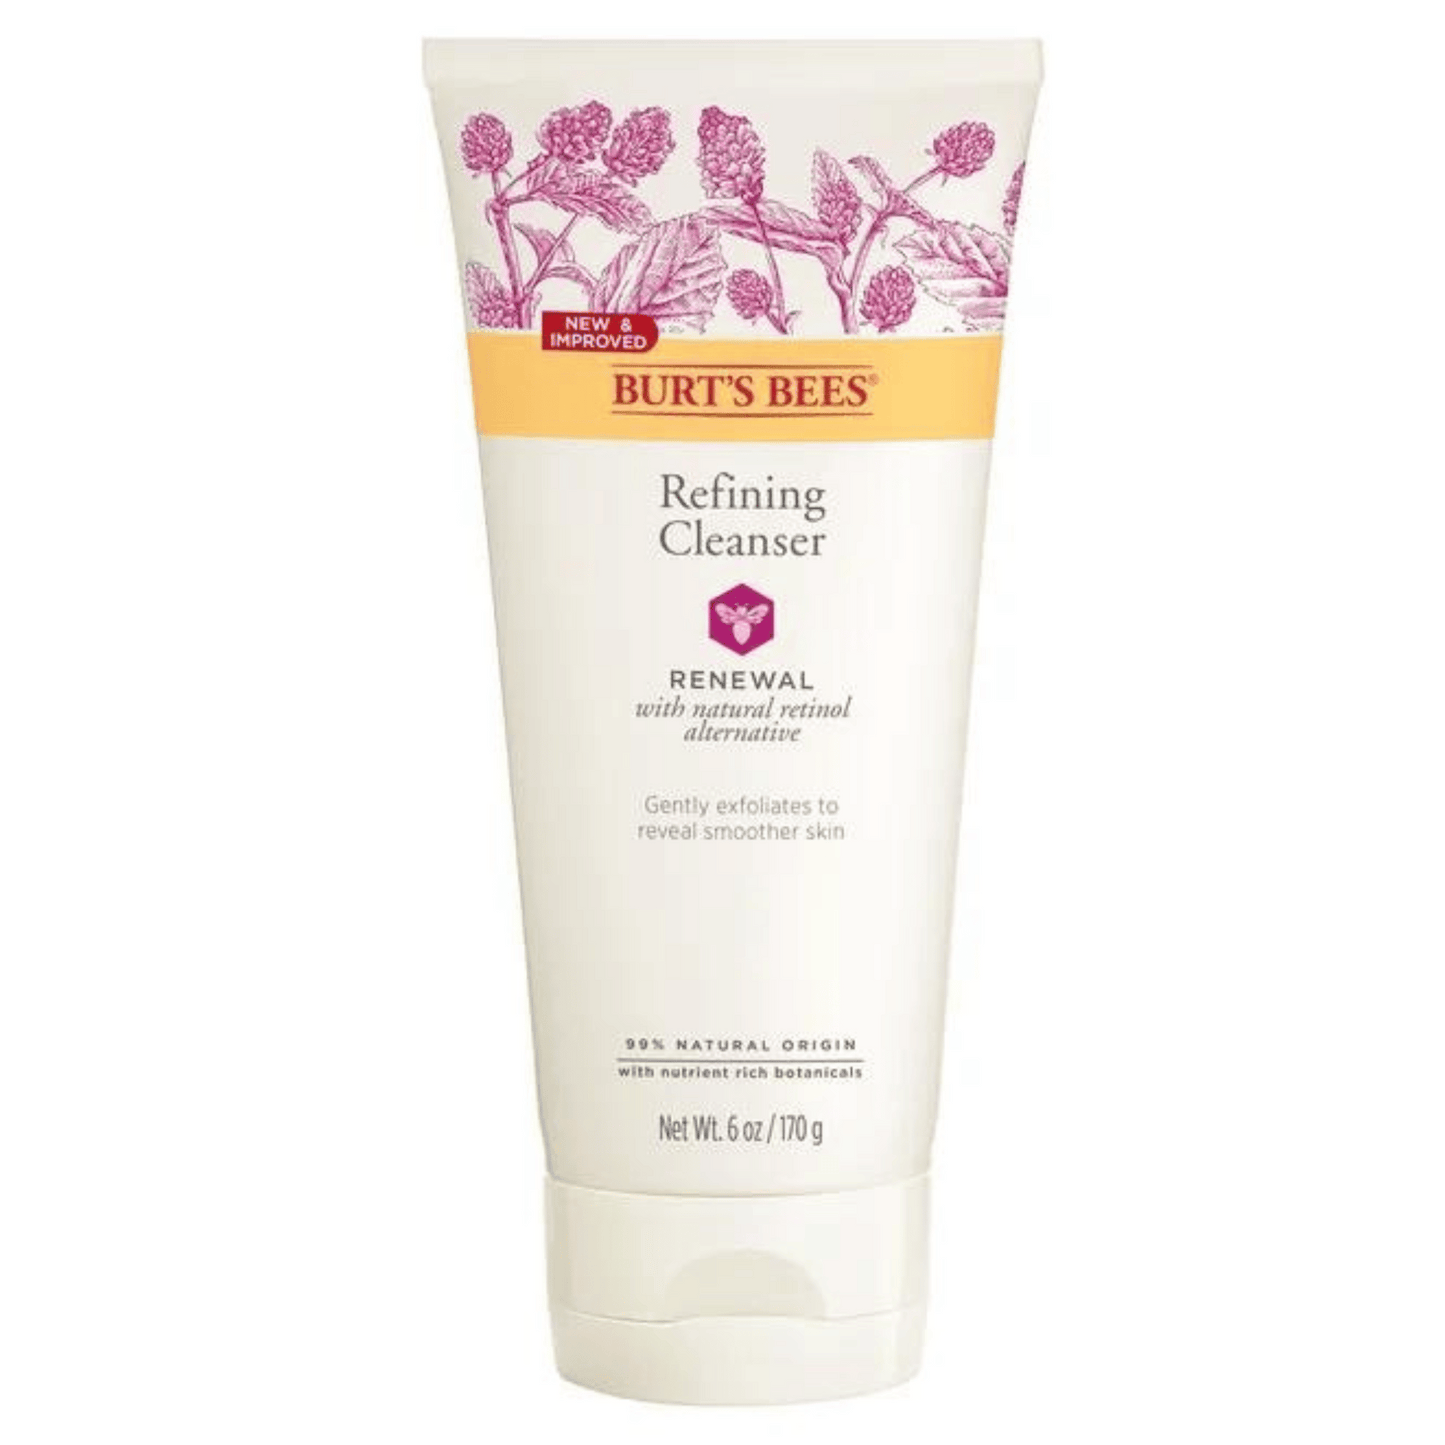 Primary Image of Renewal Refining Cleanser